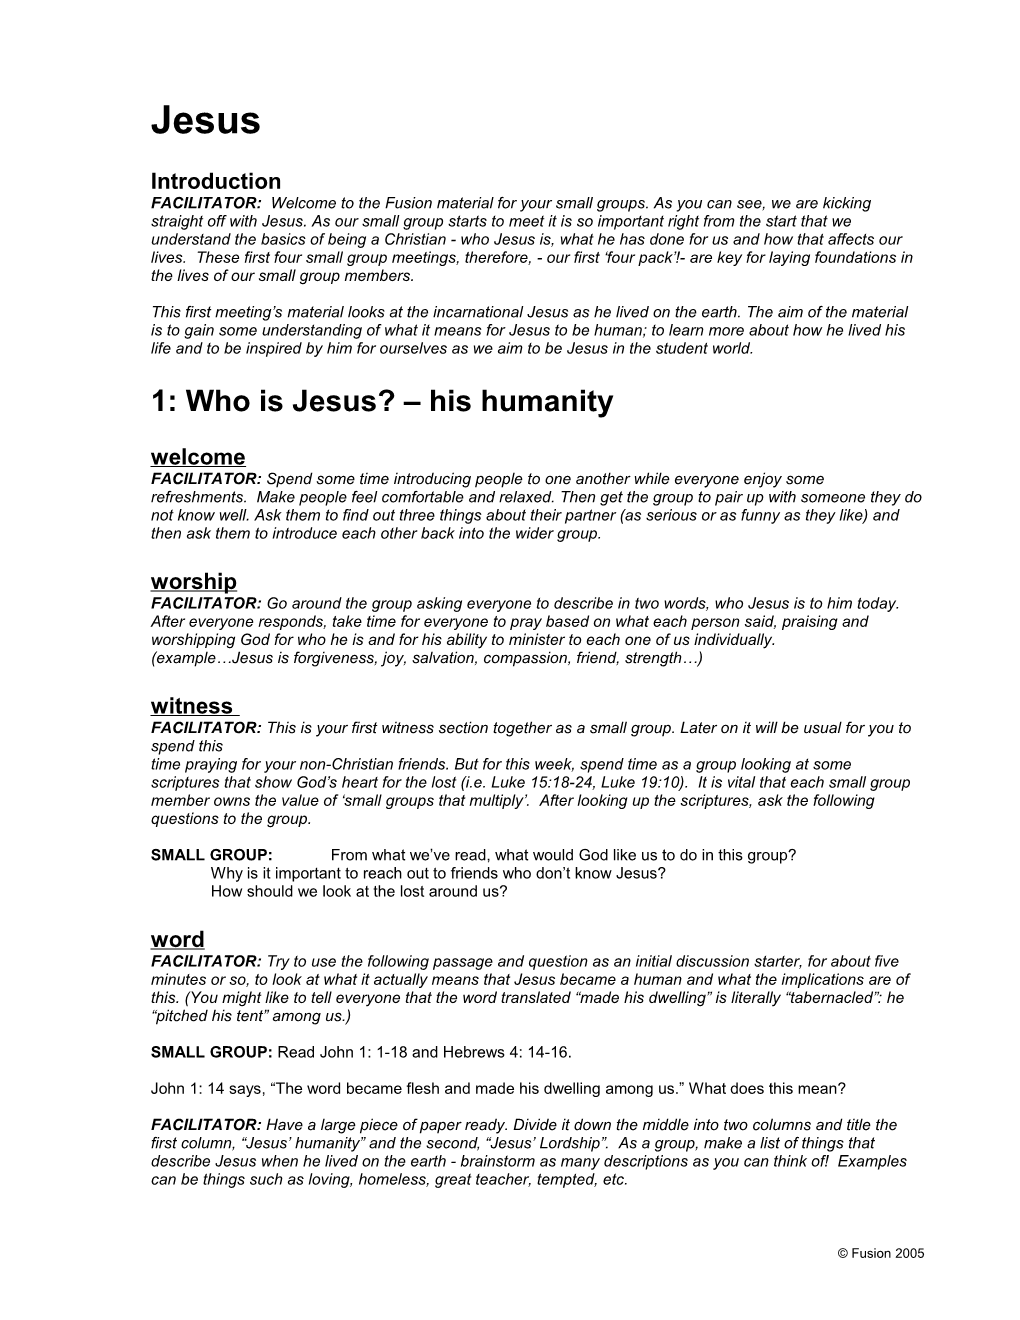 1: Who Is Jesus? His Humanity